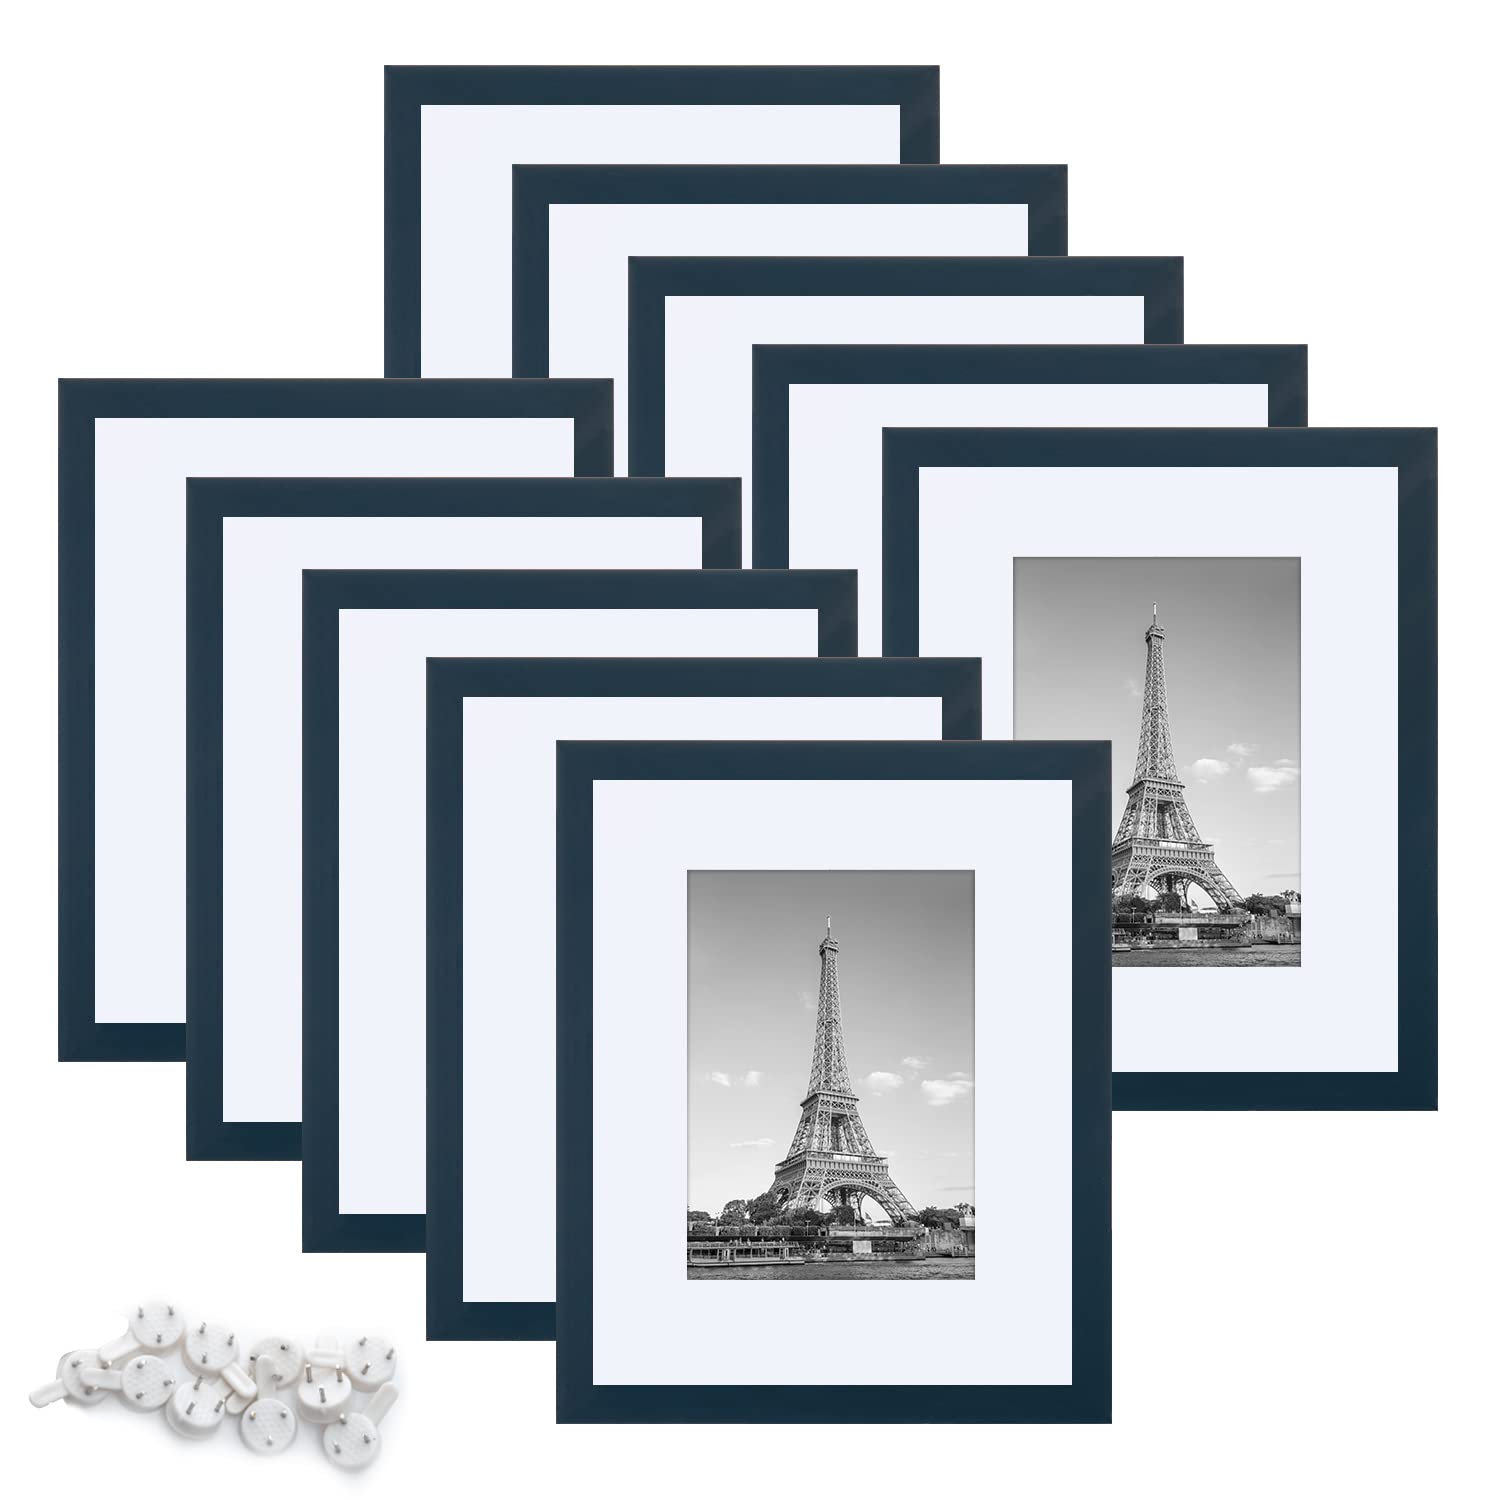 8X10 Picture Frame Set of 5, Display Pictures 5X7 with Mat or 8X10 without  Mat